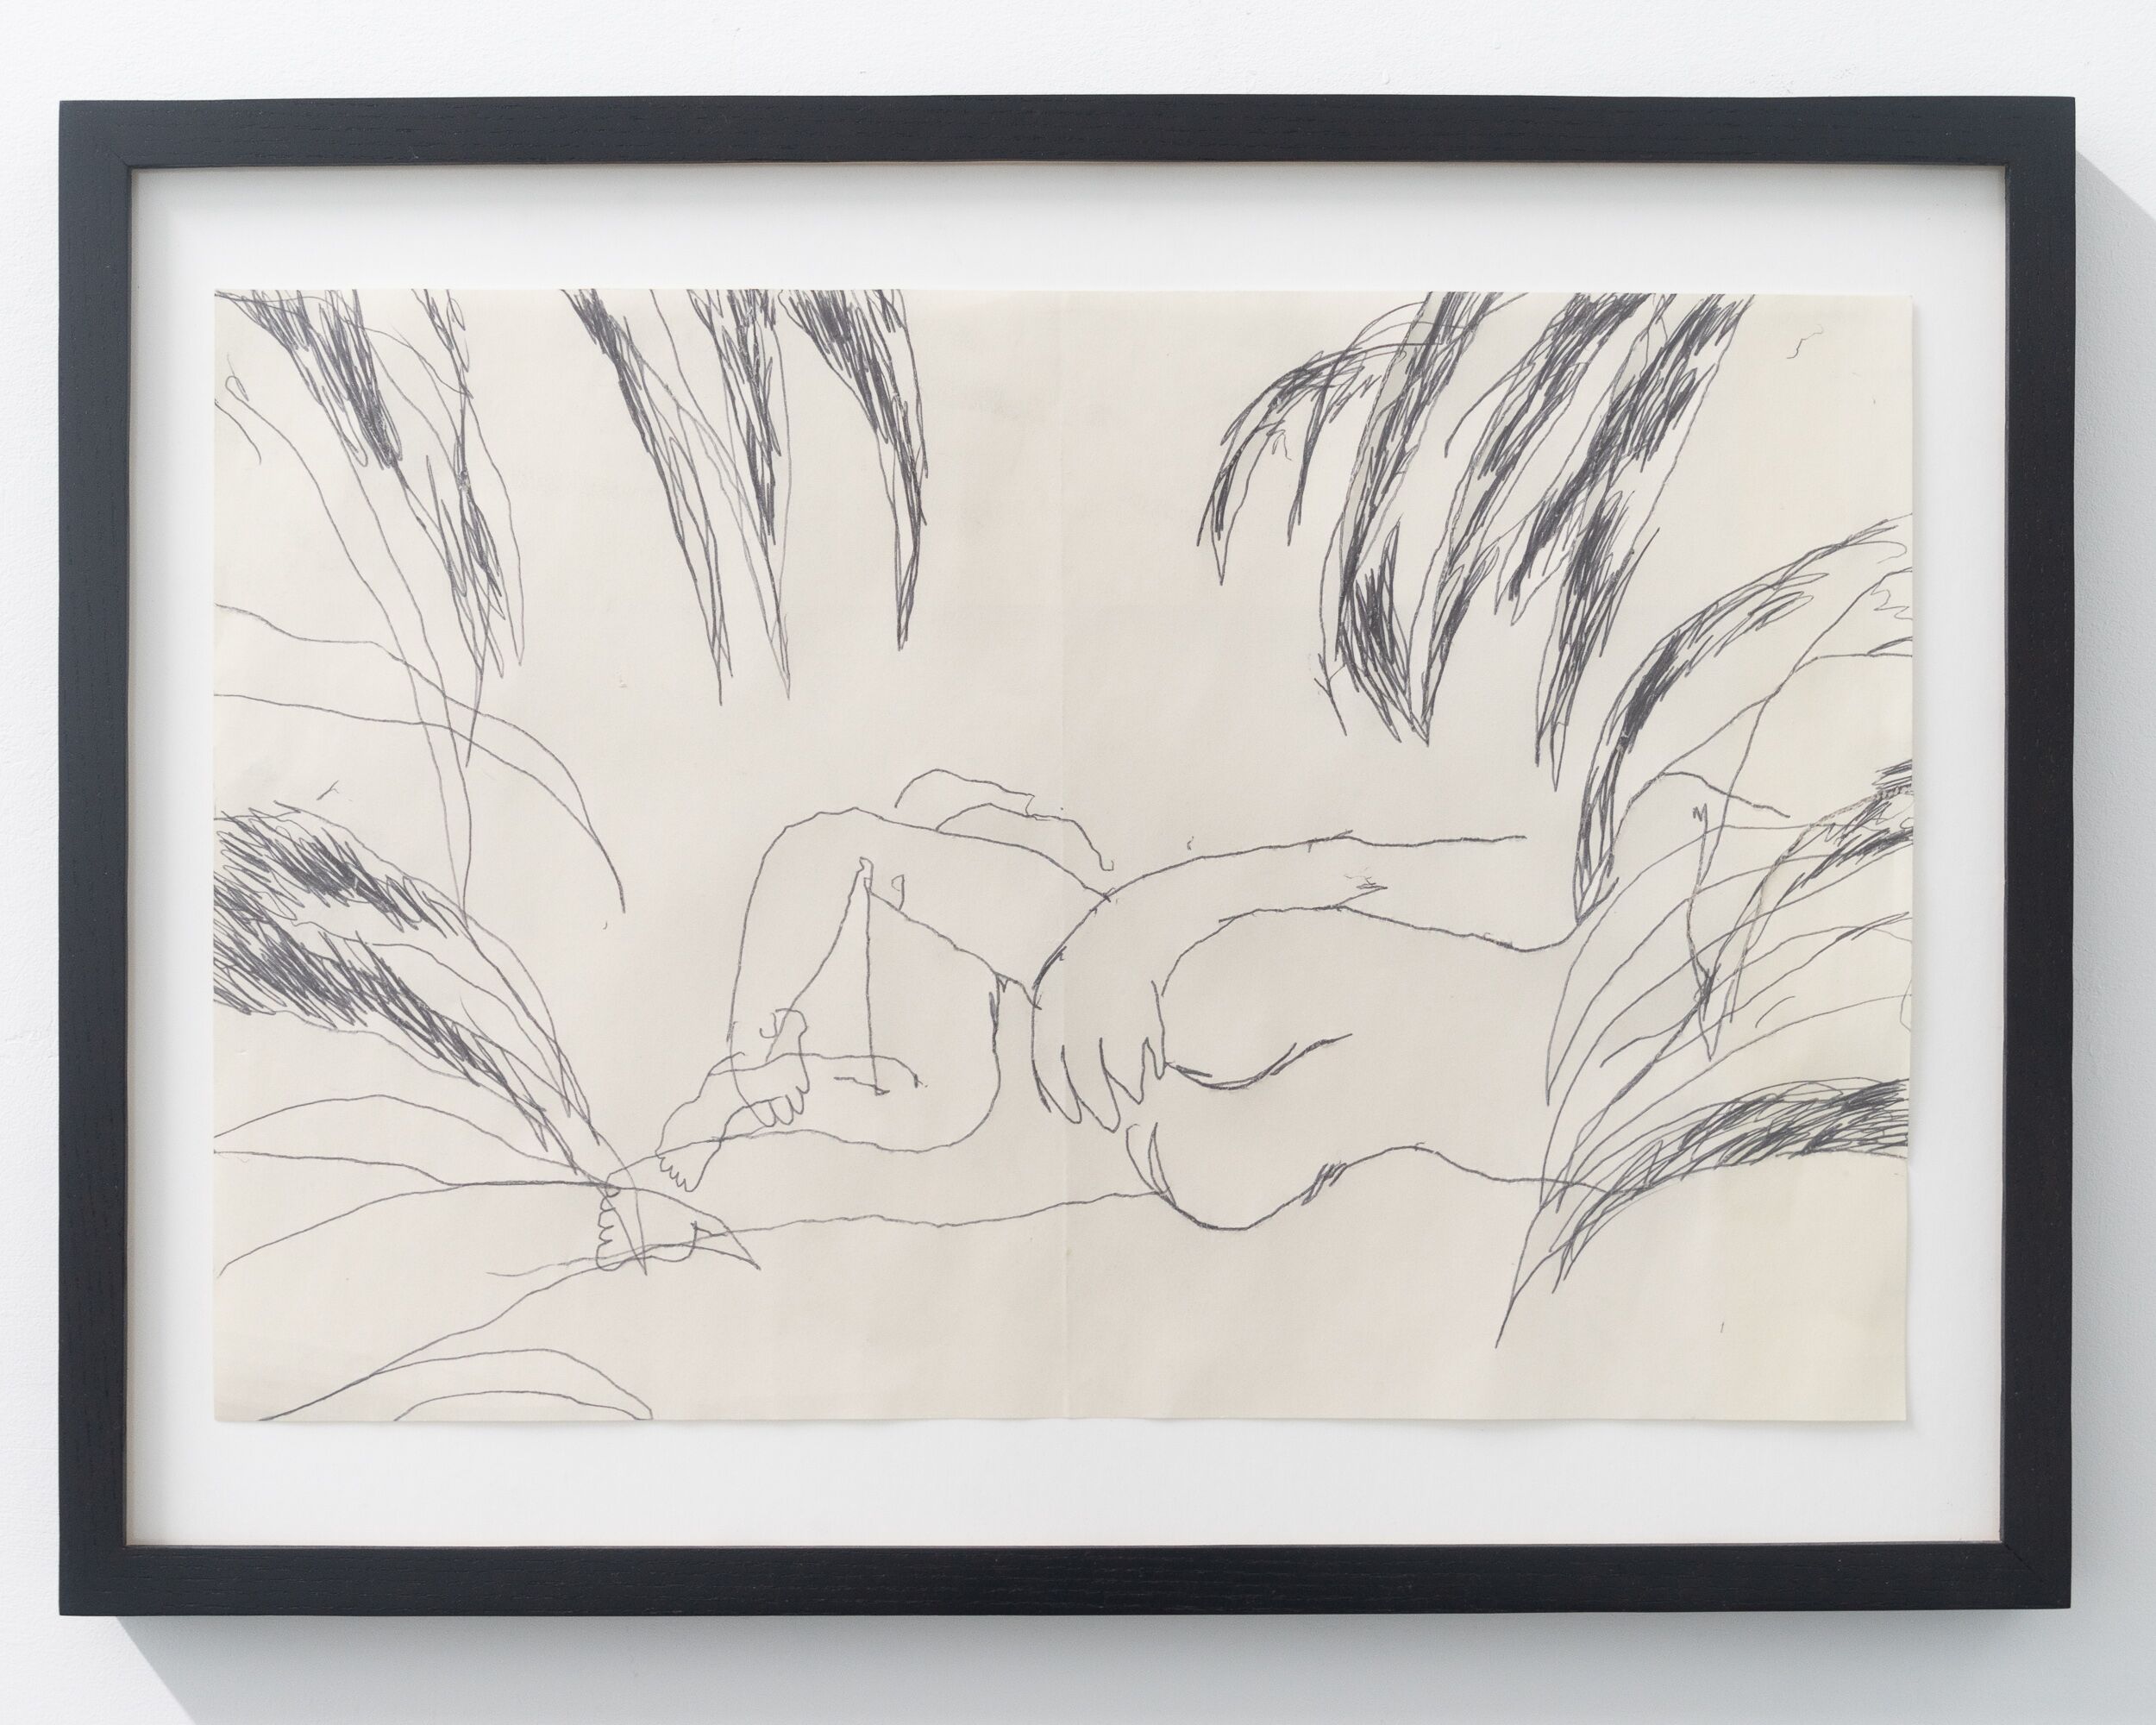   Emilie Gossiaux   In the Bushes , 2018 26 1/2 x 17 1/2 inches 67.3 x 44.5 cm  